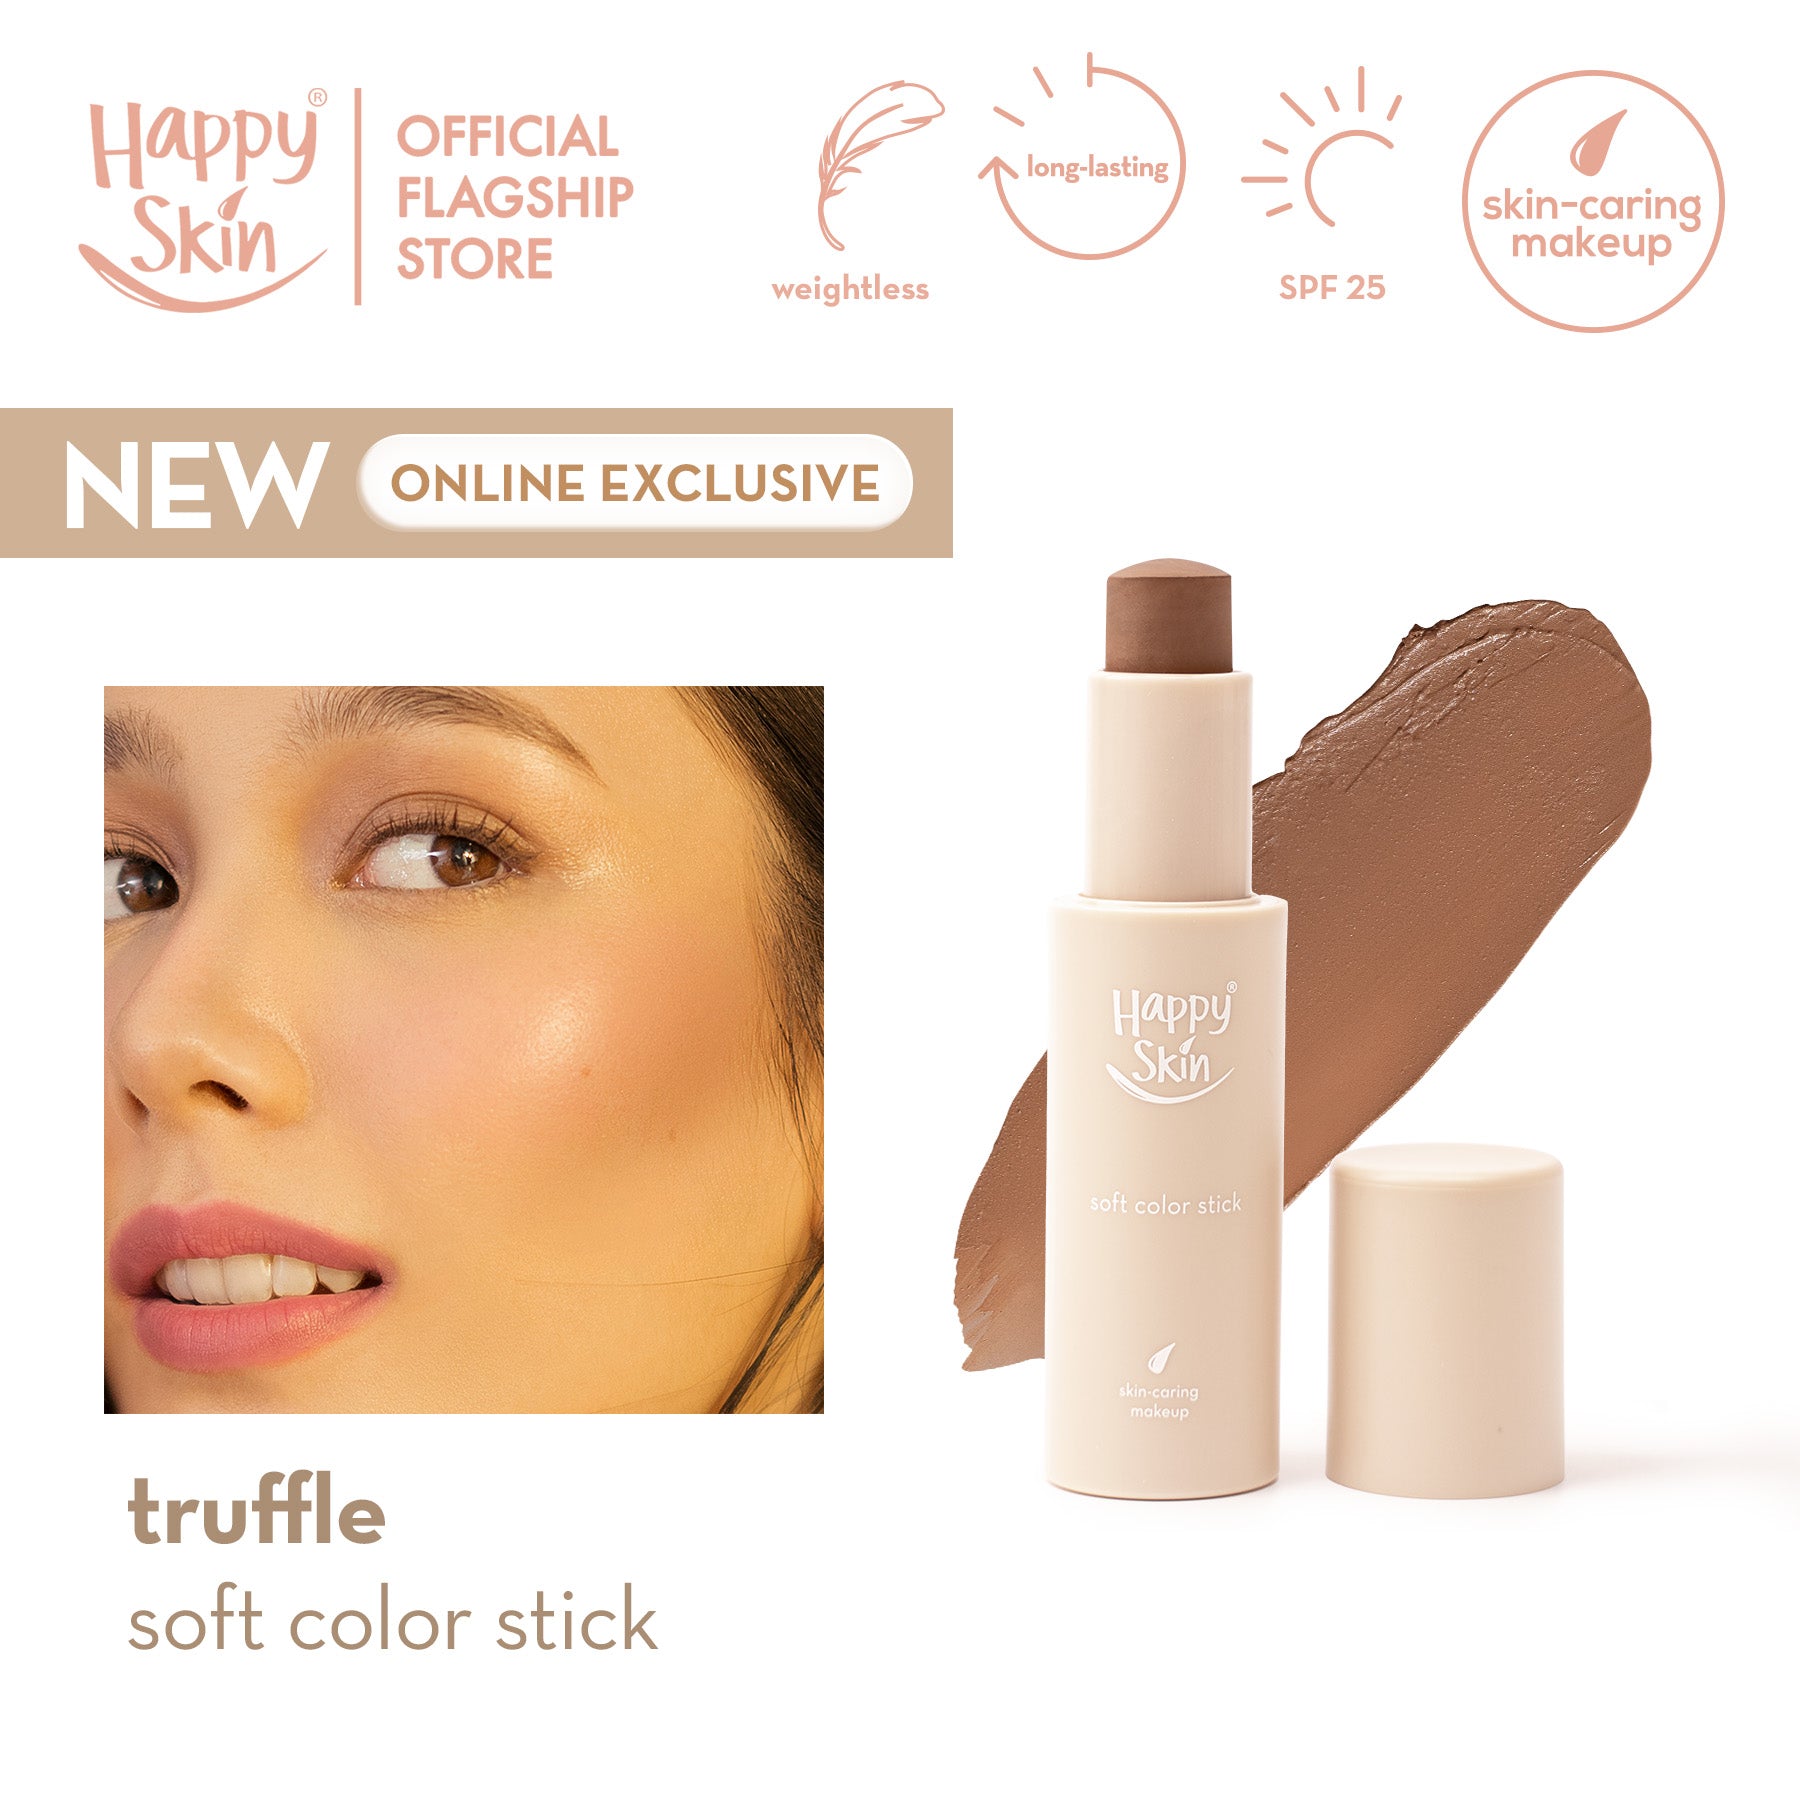 Happy Skin Off Duty Soft Color Stick in Truffle